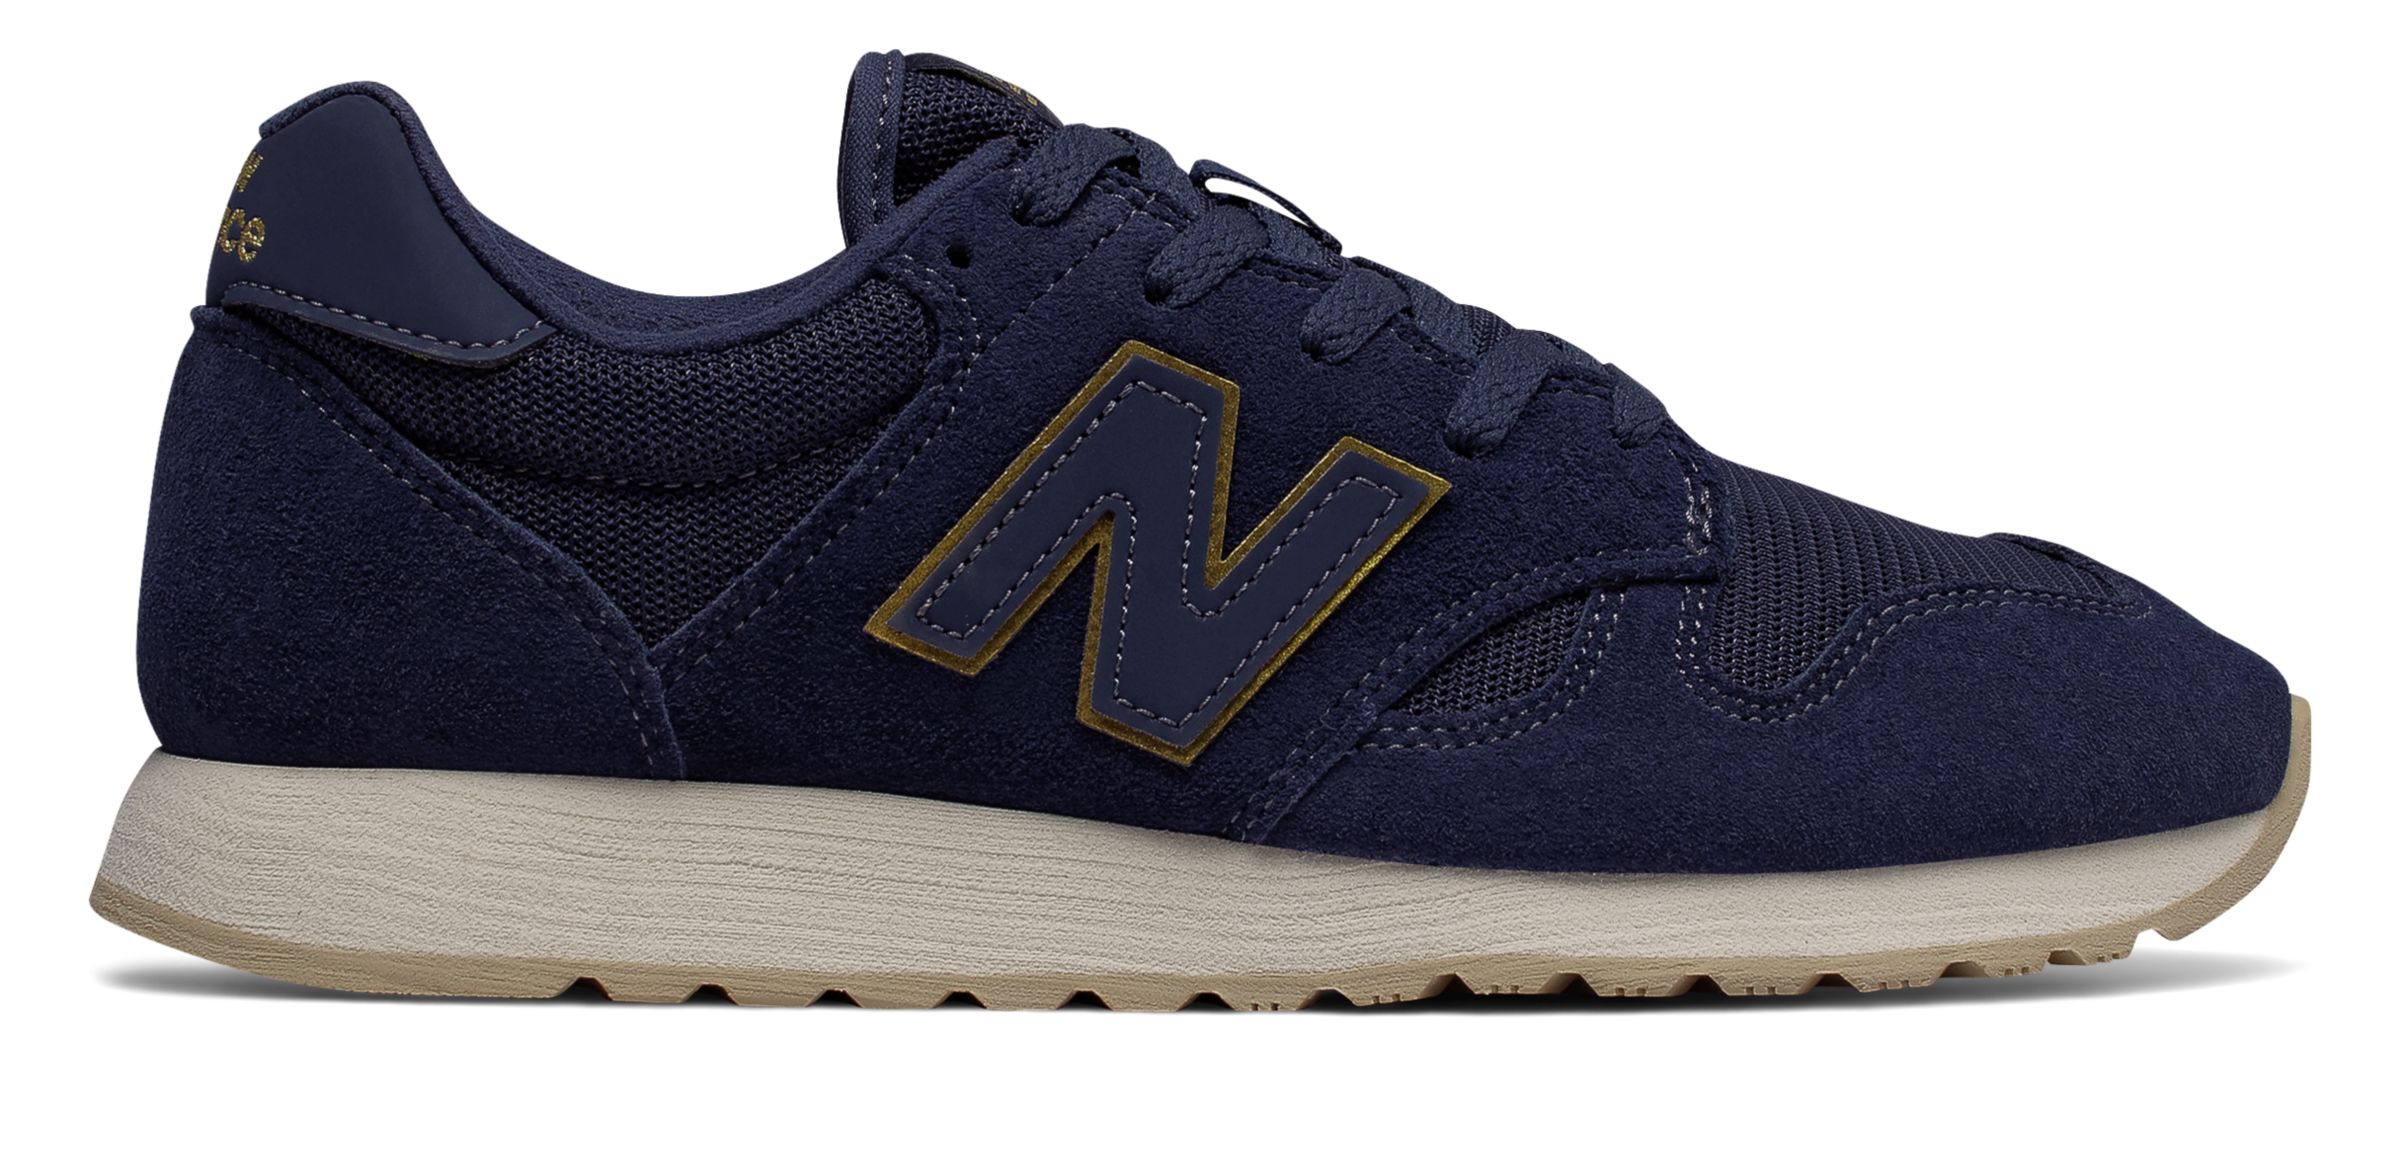 New Balance WL520-SG on Sale - Discounts Up to 52% Off on WL520MG at Joe's  New Balance Outlet